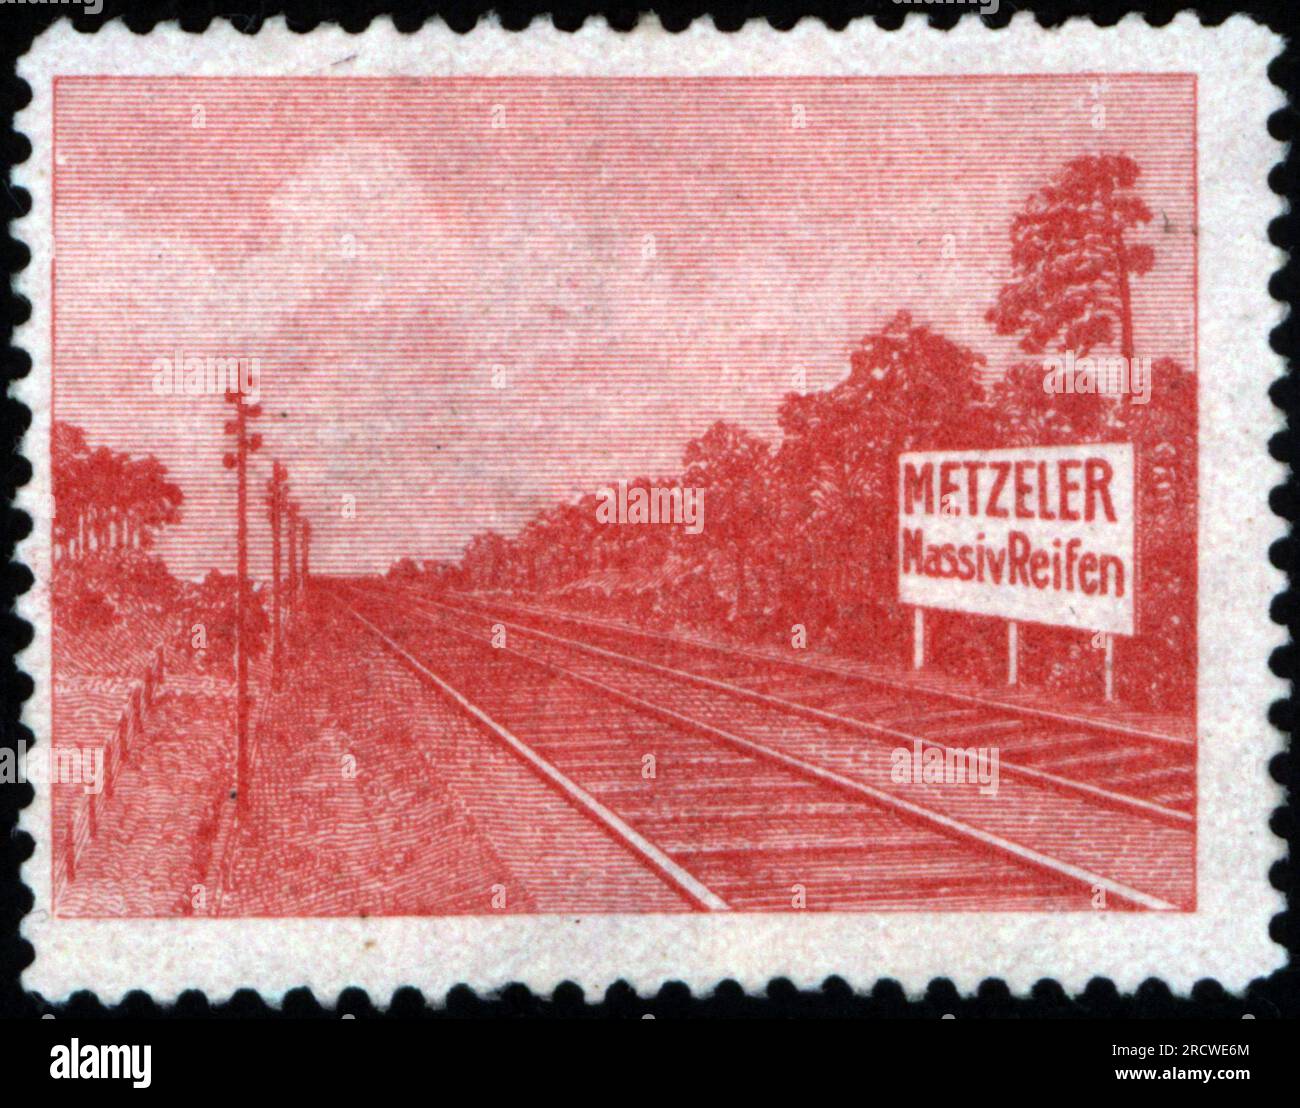 Werbung, Transport/Transport, Metzeler Solid Tyres, Metzeler OHG, München, POSTERSTEMPEL, ADDITIONAL-RIGHTS-CLEARANCE-INFO-NOT-AVAILABLE Stockfoto